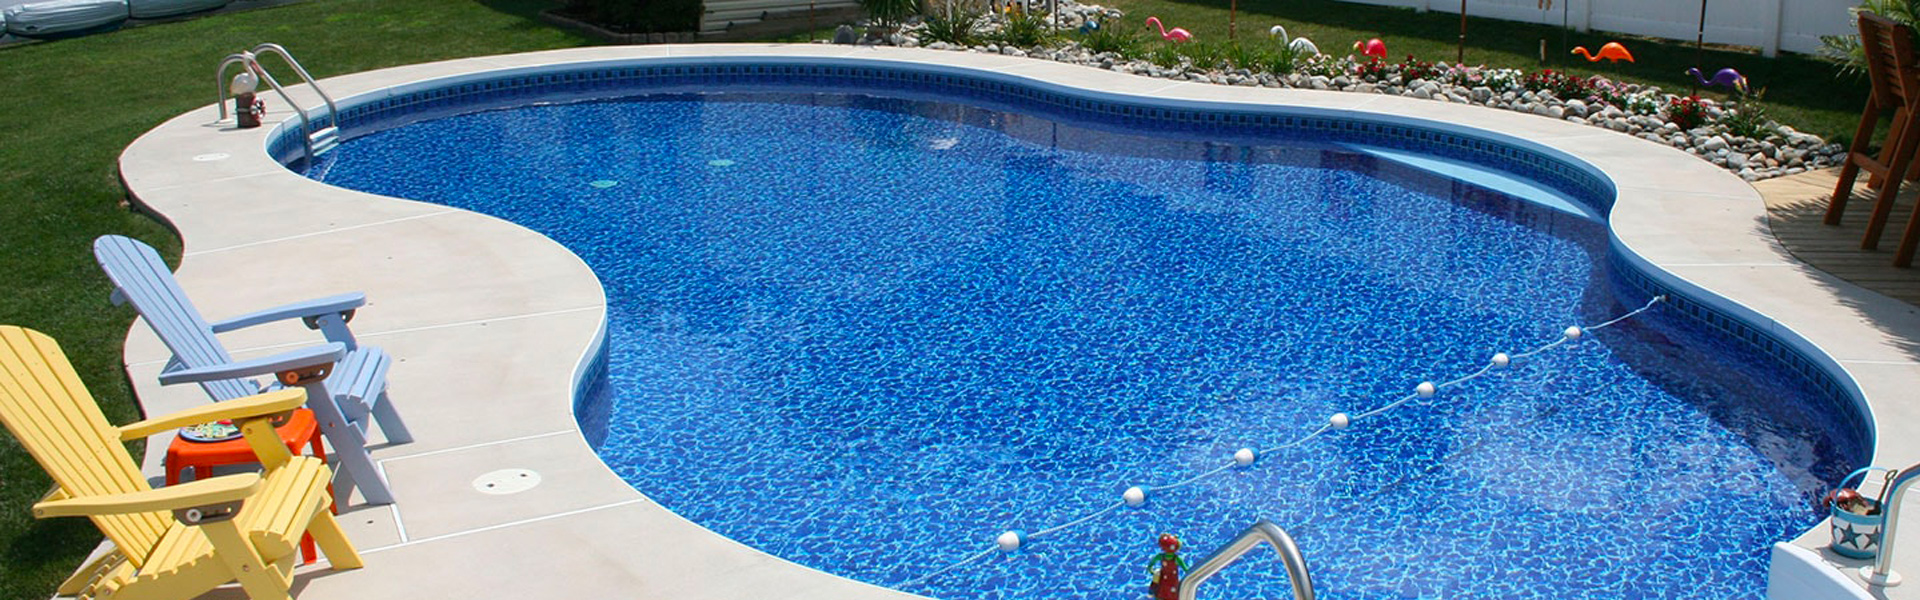 Why You Should Hire a Professional Pool Cleaning Service